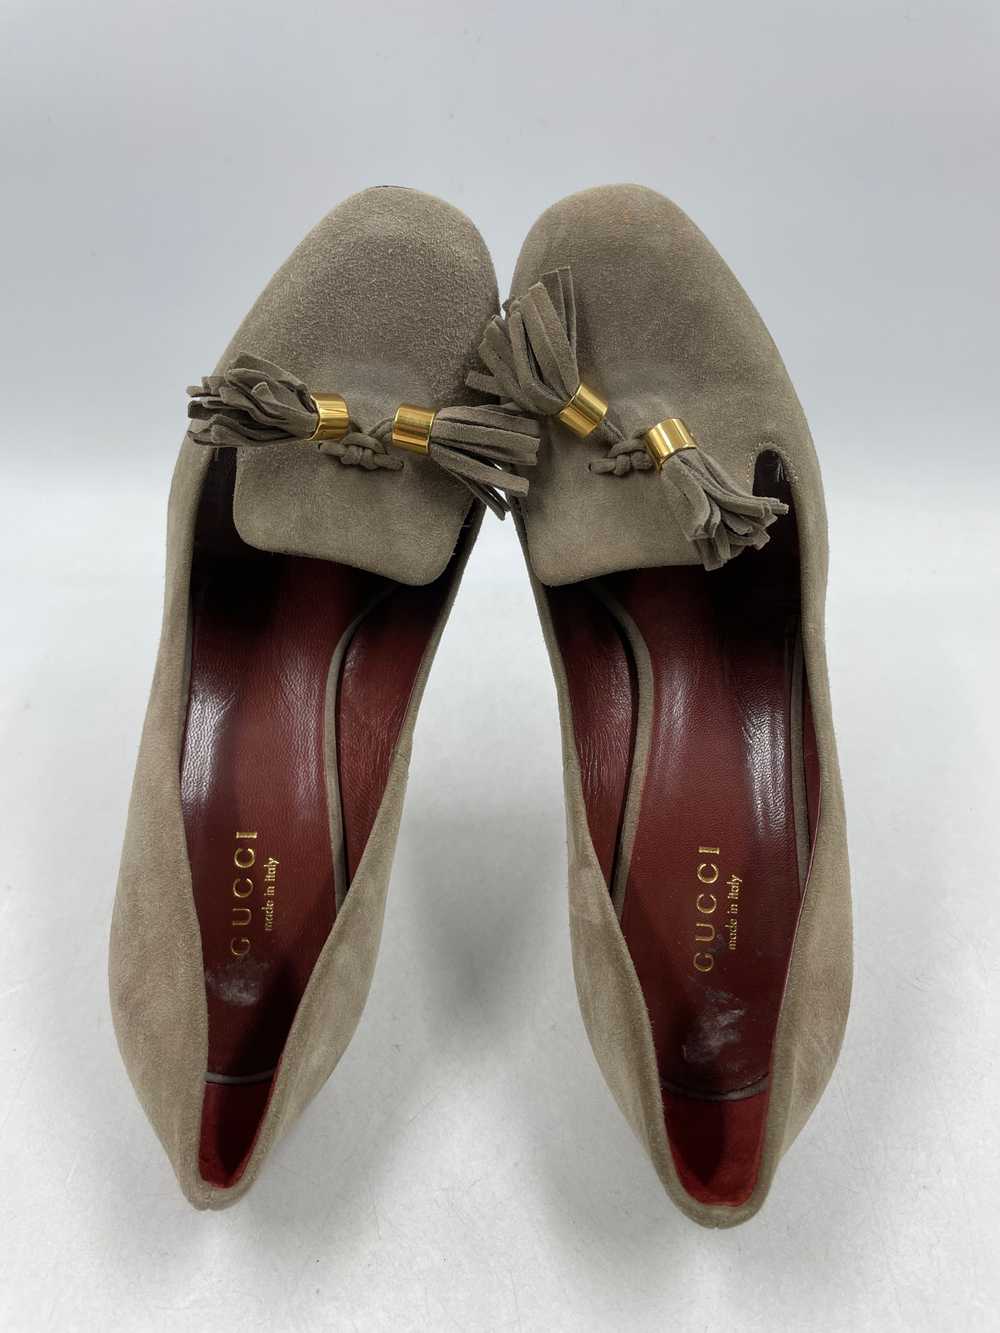 Authentic Gucci Taupe Tassel Pumps W 5.5 - image 6